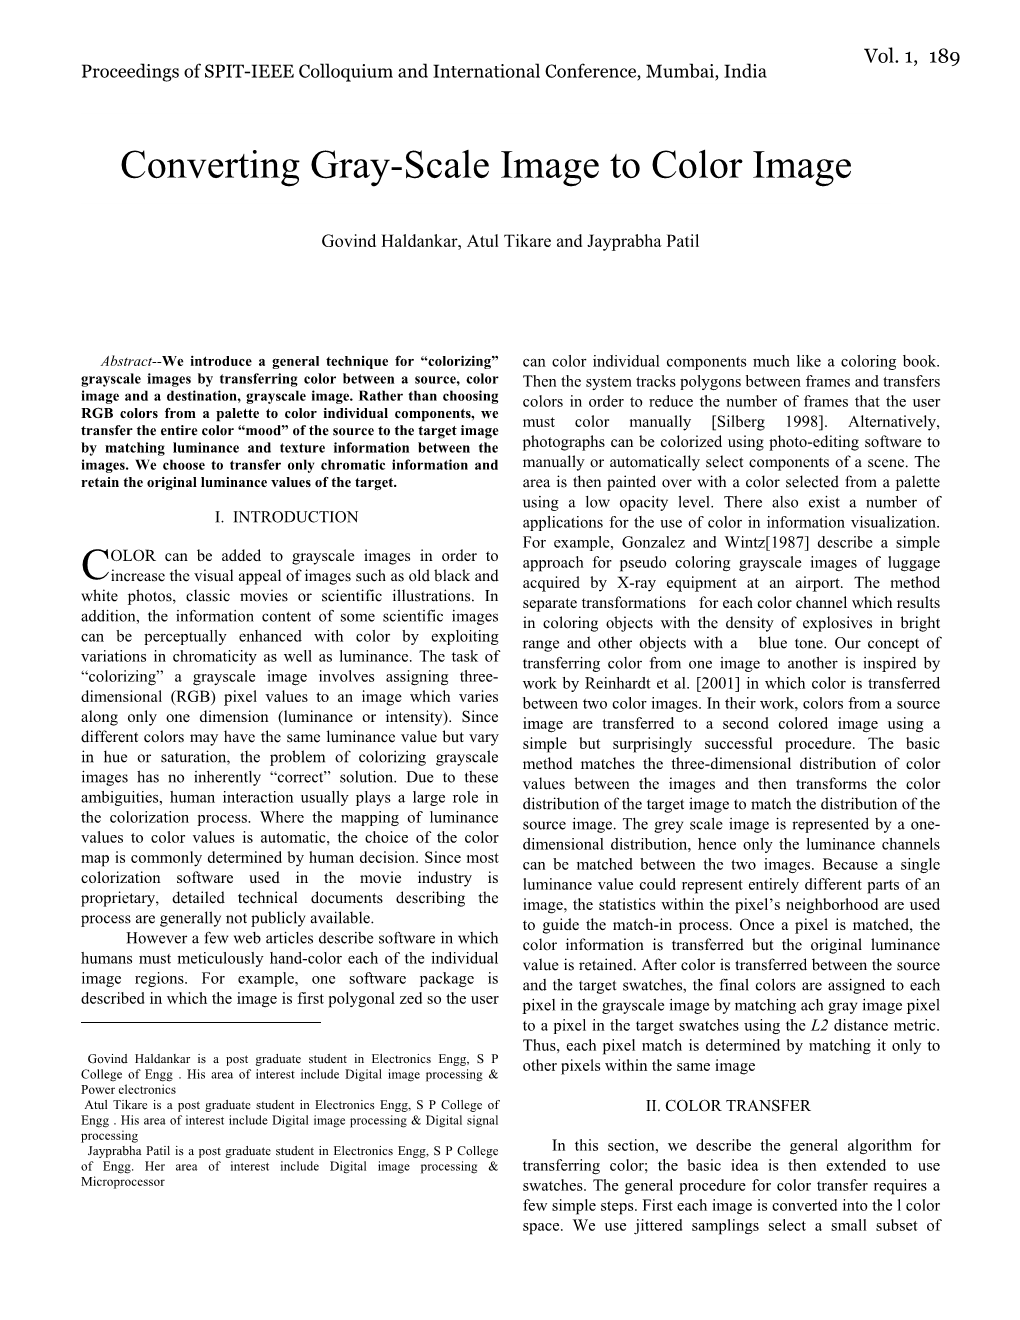 Converting Gray-Scale Image to Color Image